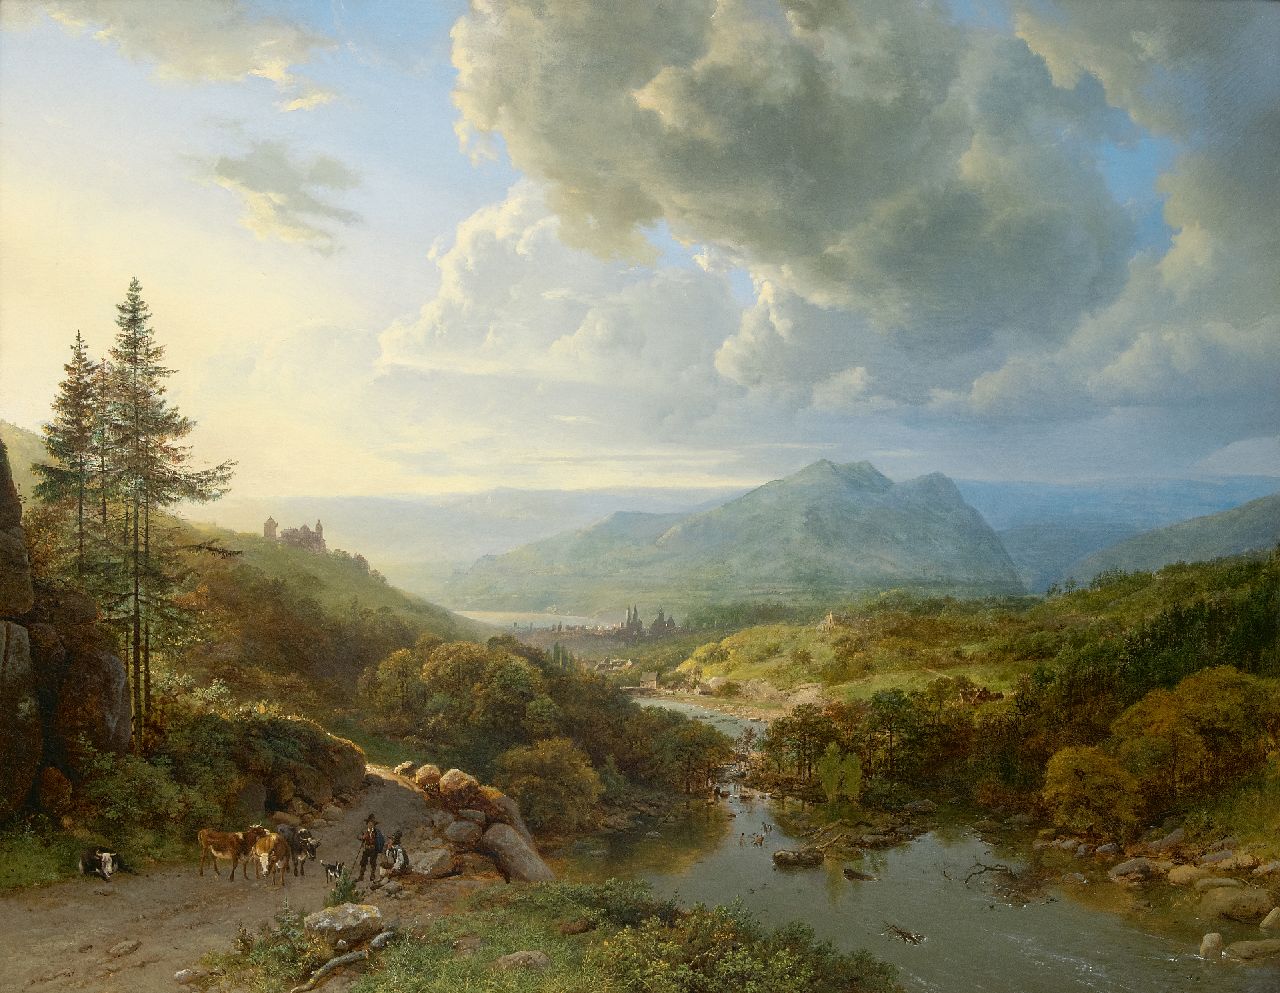 Koekkoek B.C.  | Barend Cornelis Koekkoek | Paintings offered for sale | Figures and cows in a mountainous landscape, oil on canvas 101.0 x 128.8 cm, signed l.l. 'B.C. Koekkoek' in full and 'PG v O' in mon. and painted ca. 1832